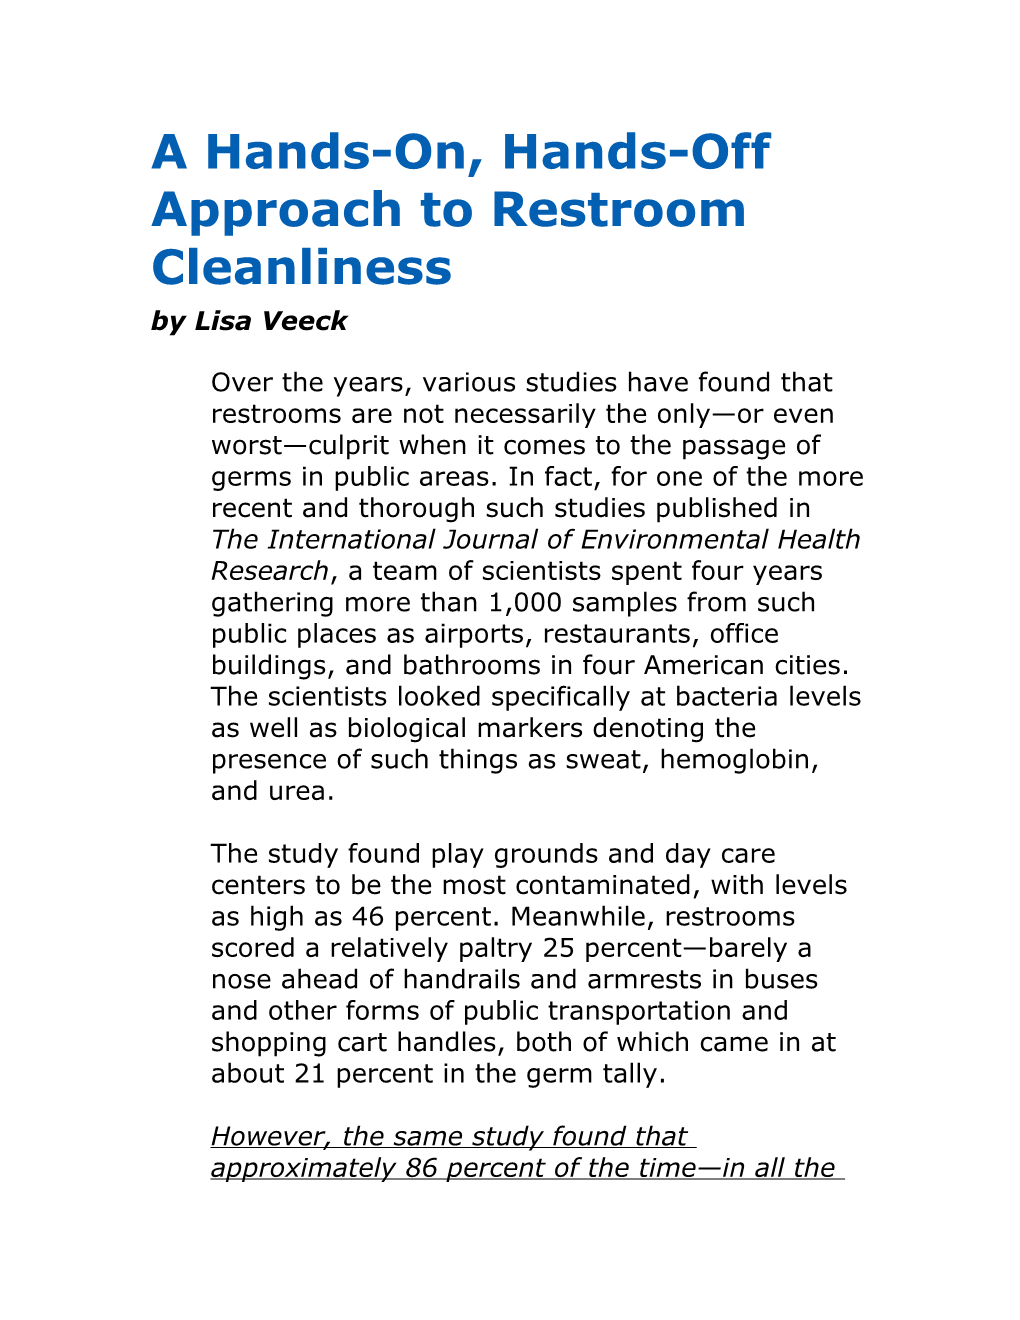 A Hands-On, Hands-Off Approach to Restroom Cleanliness